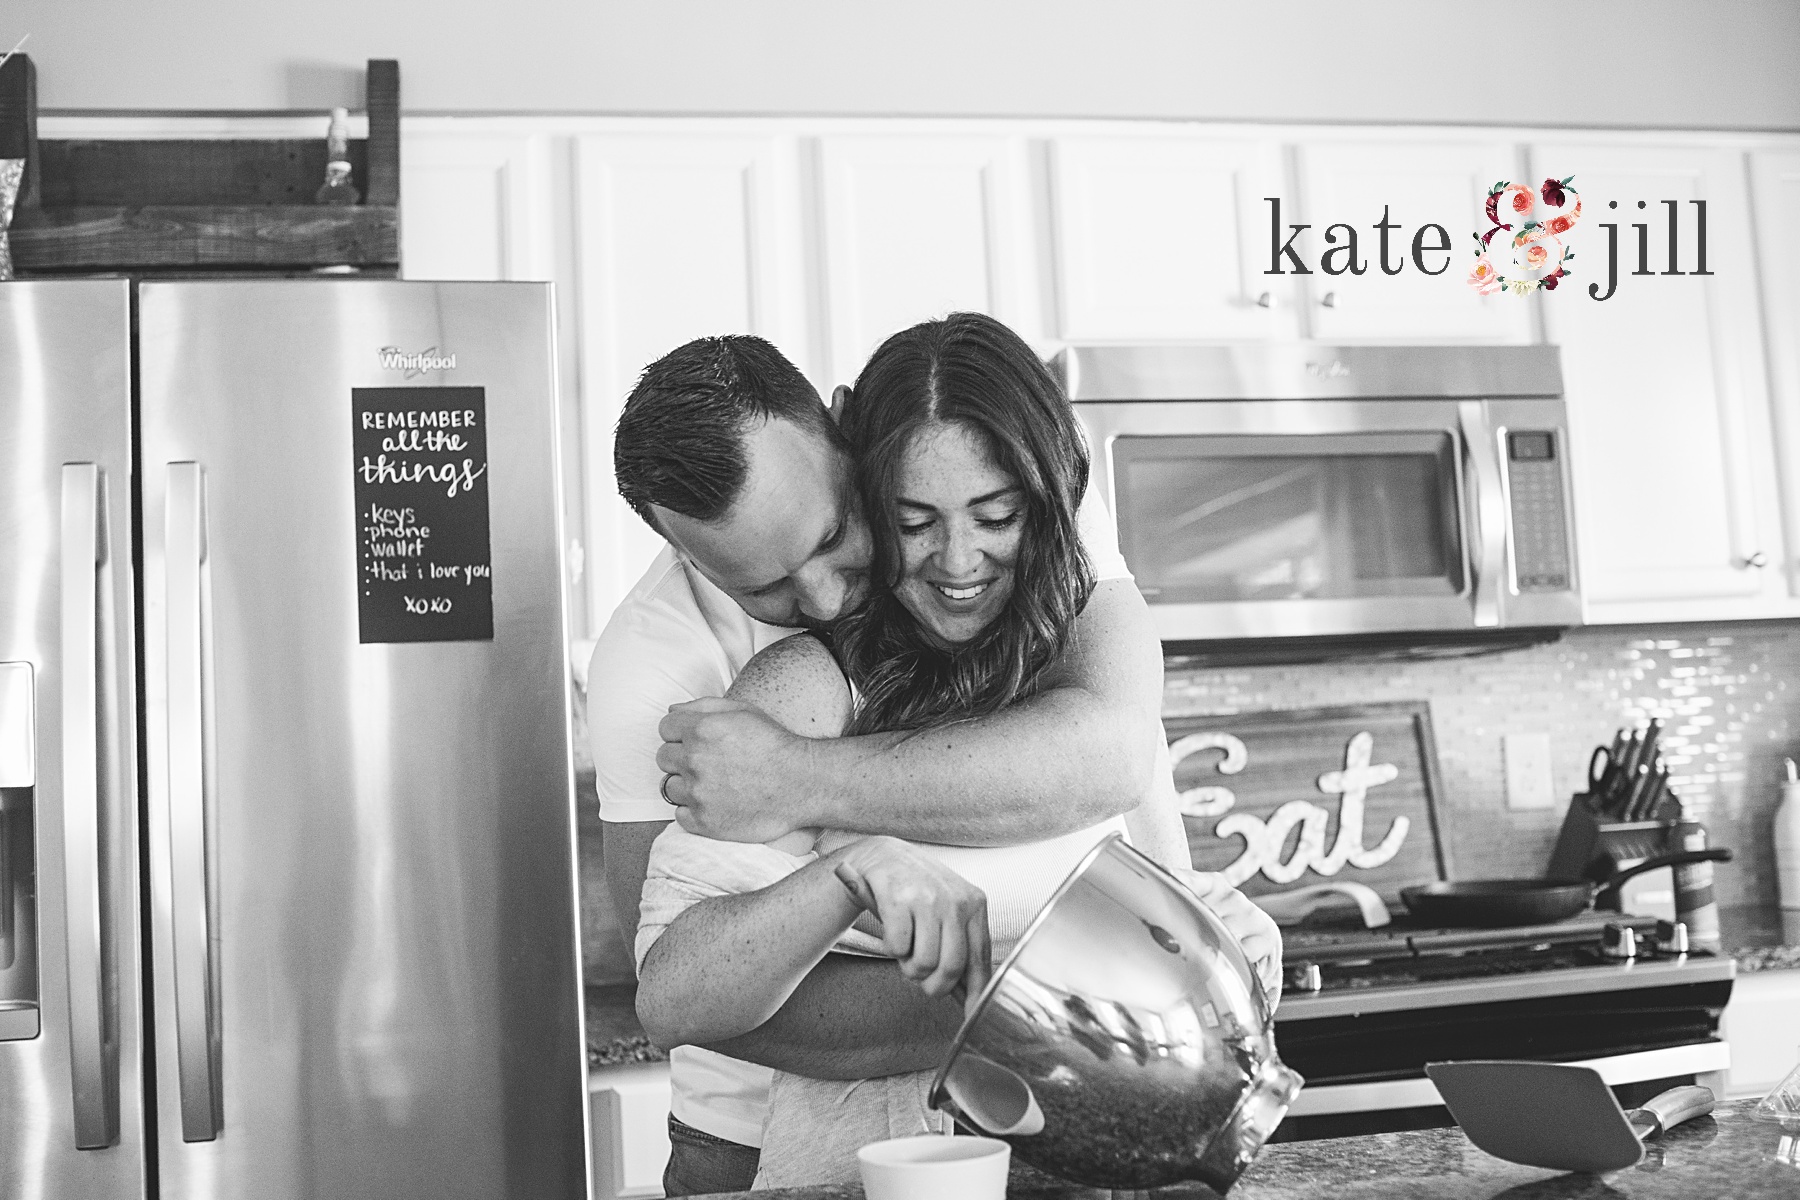 couple snuggling in kitchen